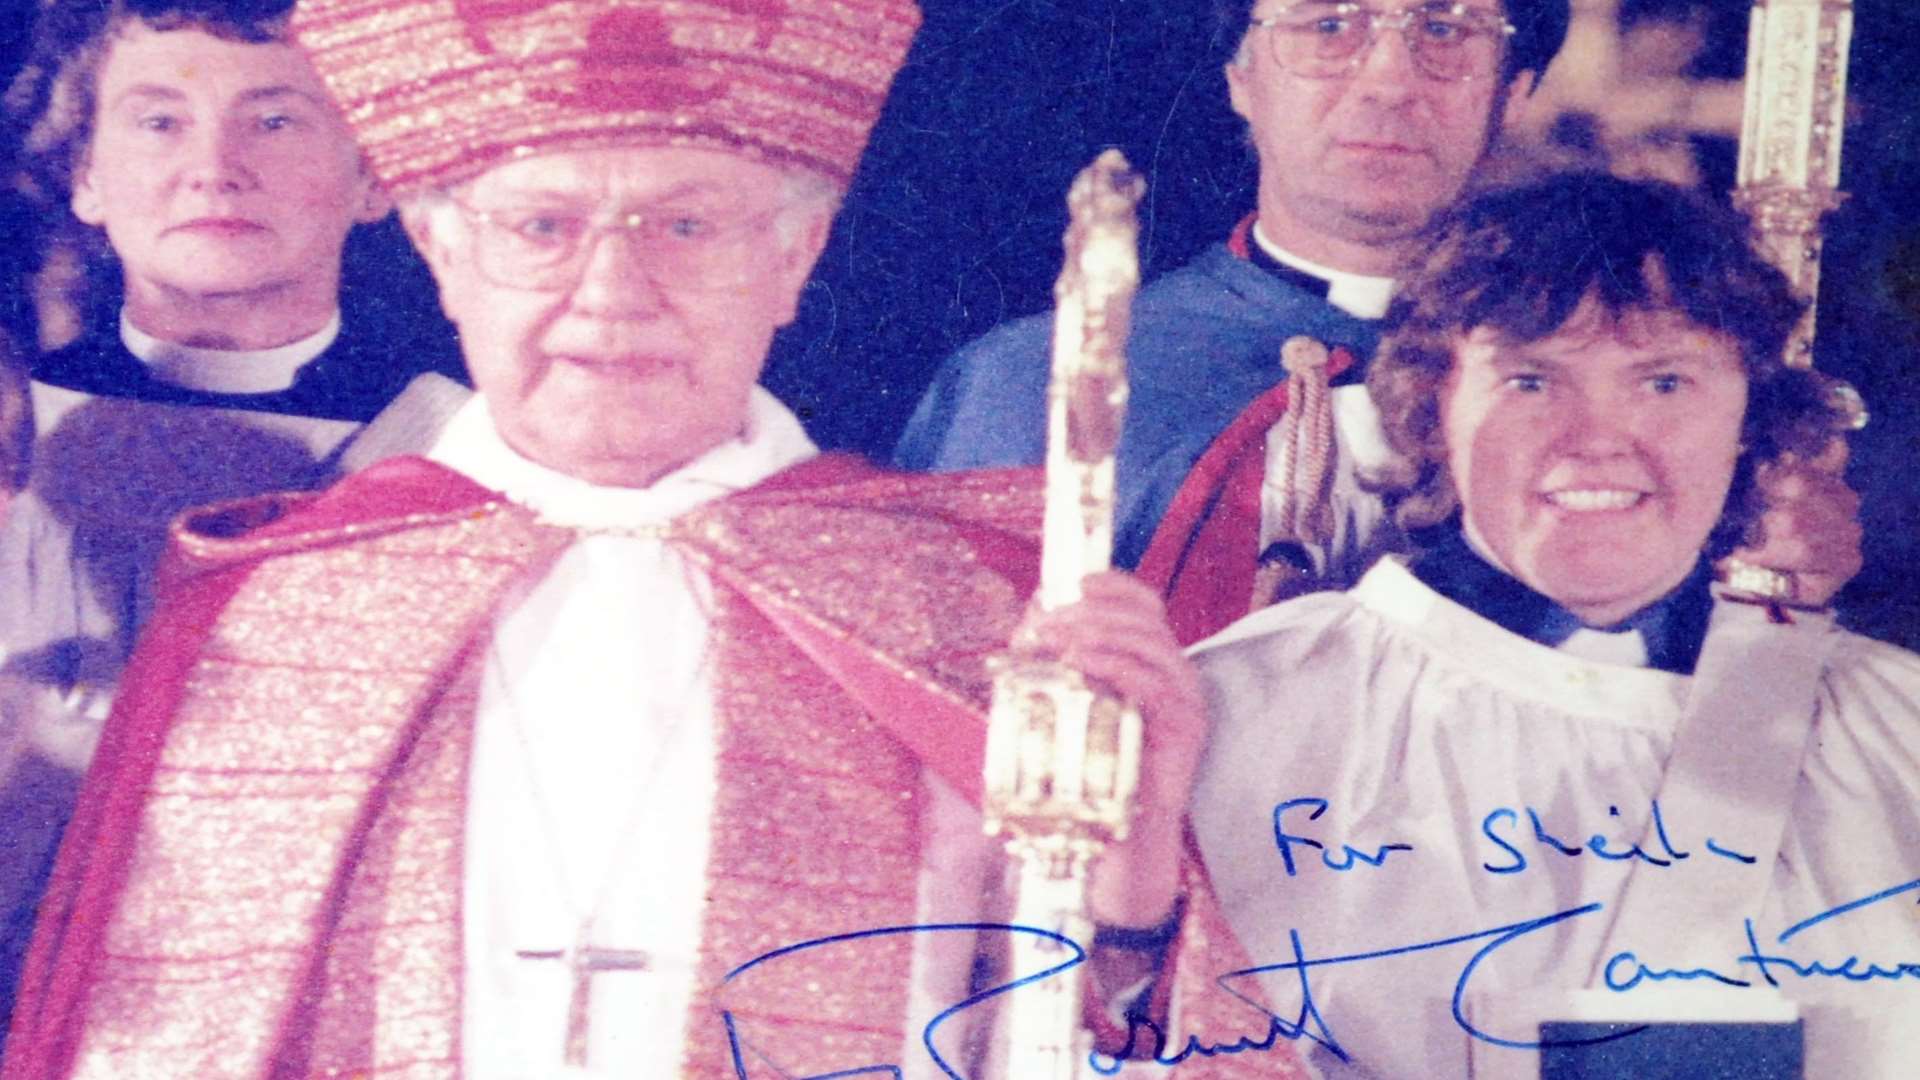 Rev Sheila in 1987 with Archbishop of Canterbury Robert Runcie when she was ordained as deacon